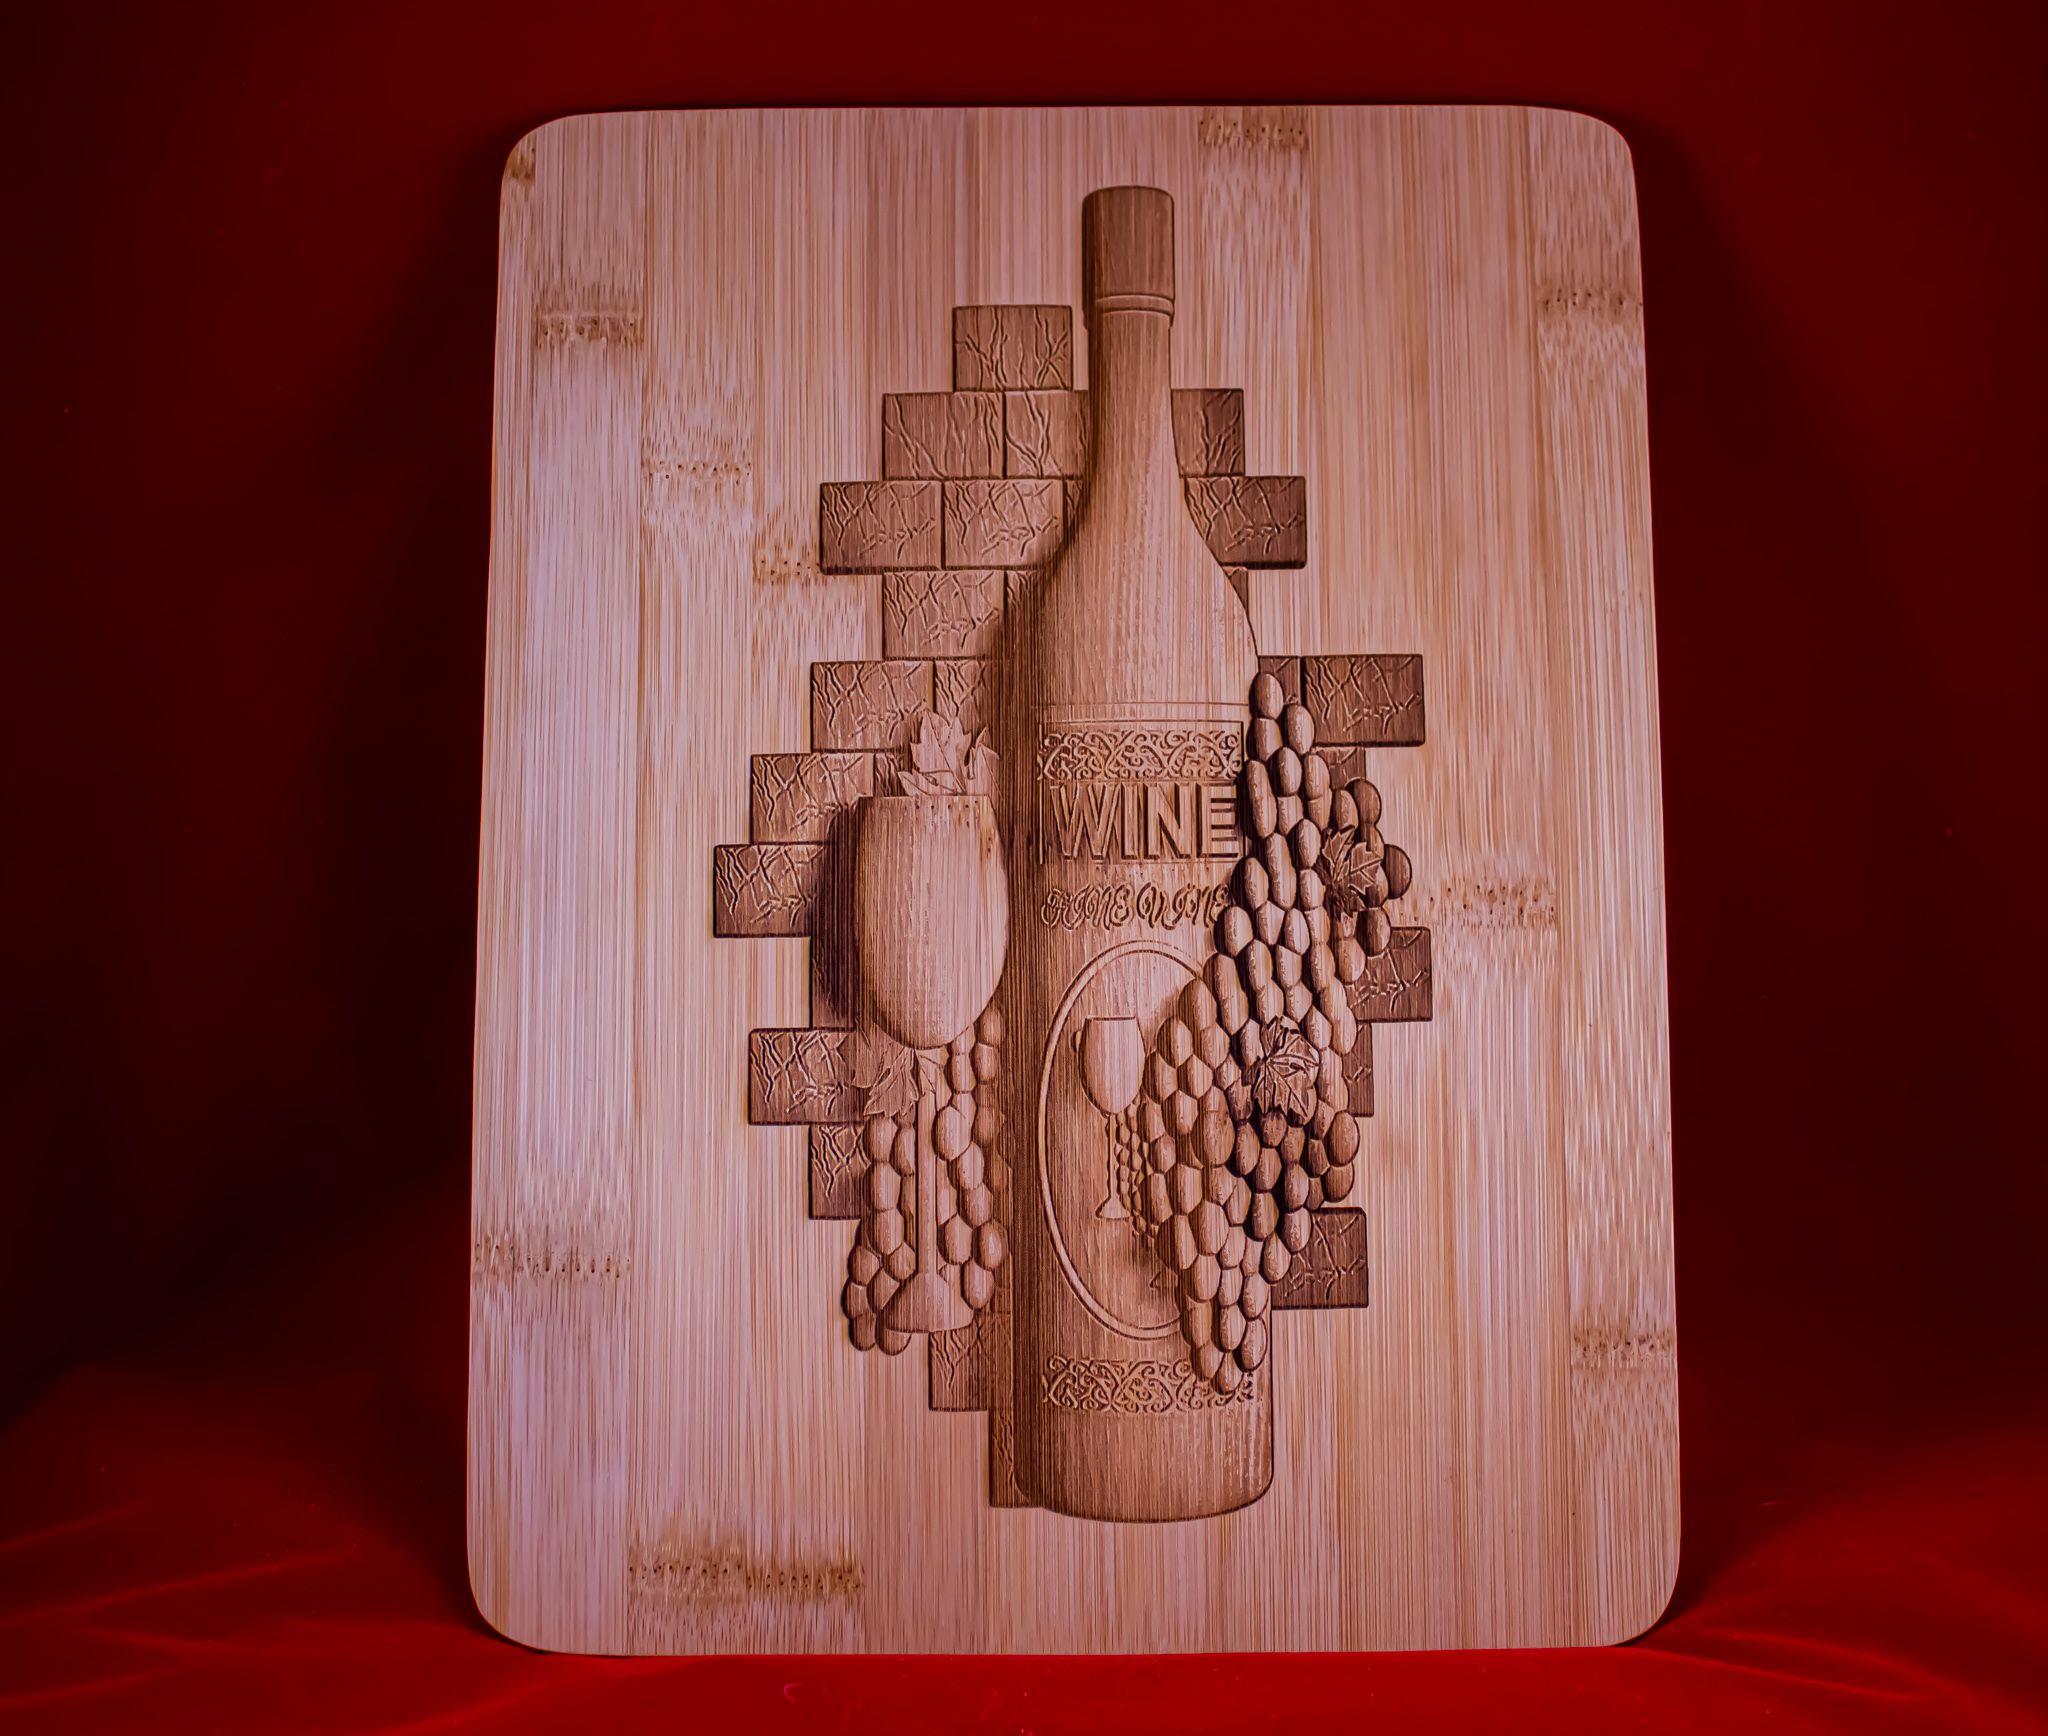 Be Our Guest Laser Engraved Bamboo Cutting Board